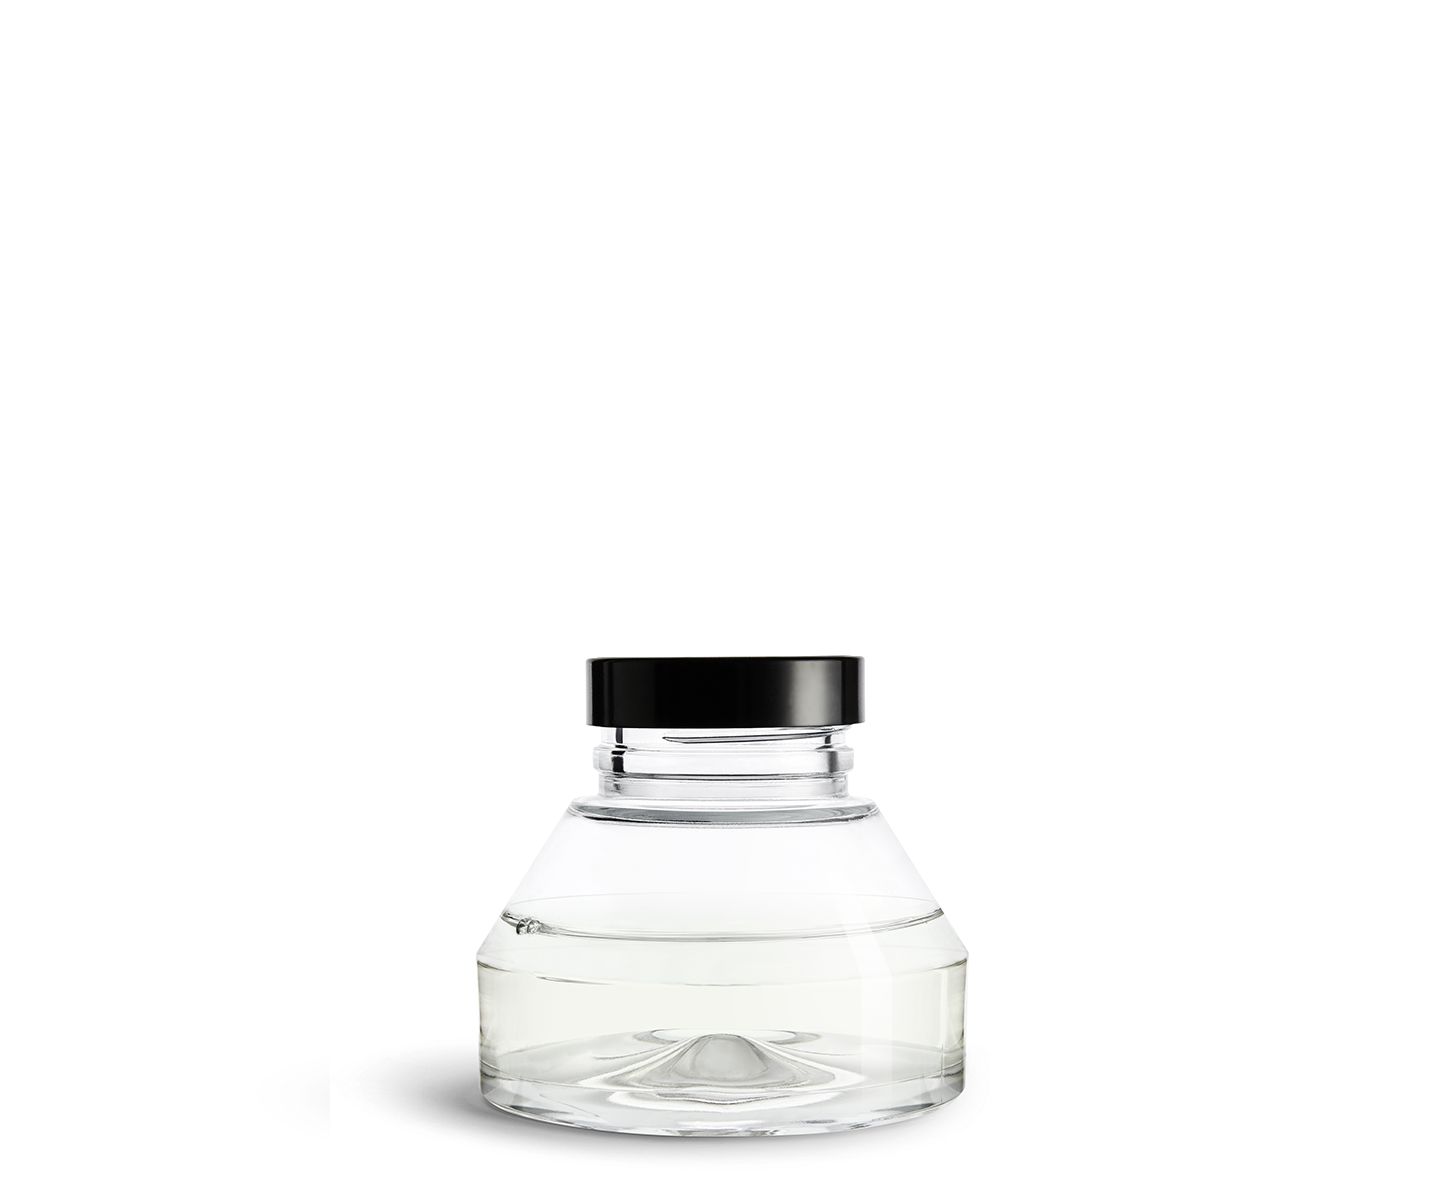 Roses Hourglass Diffuser refill 2.0 | diptyque (US)